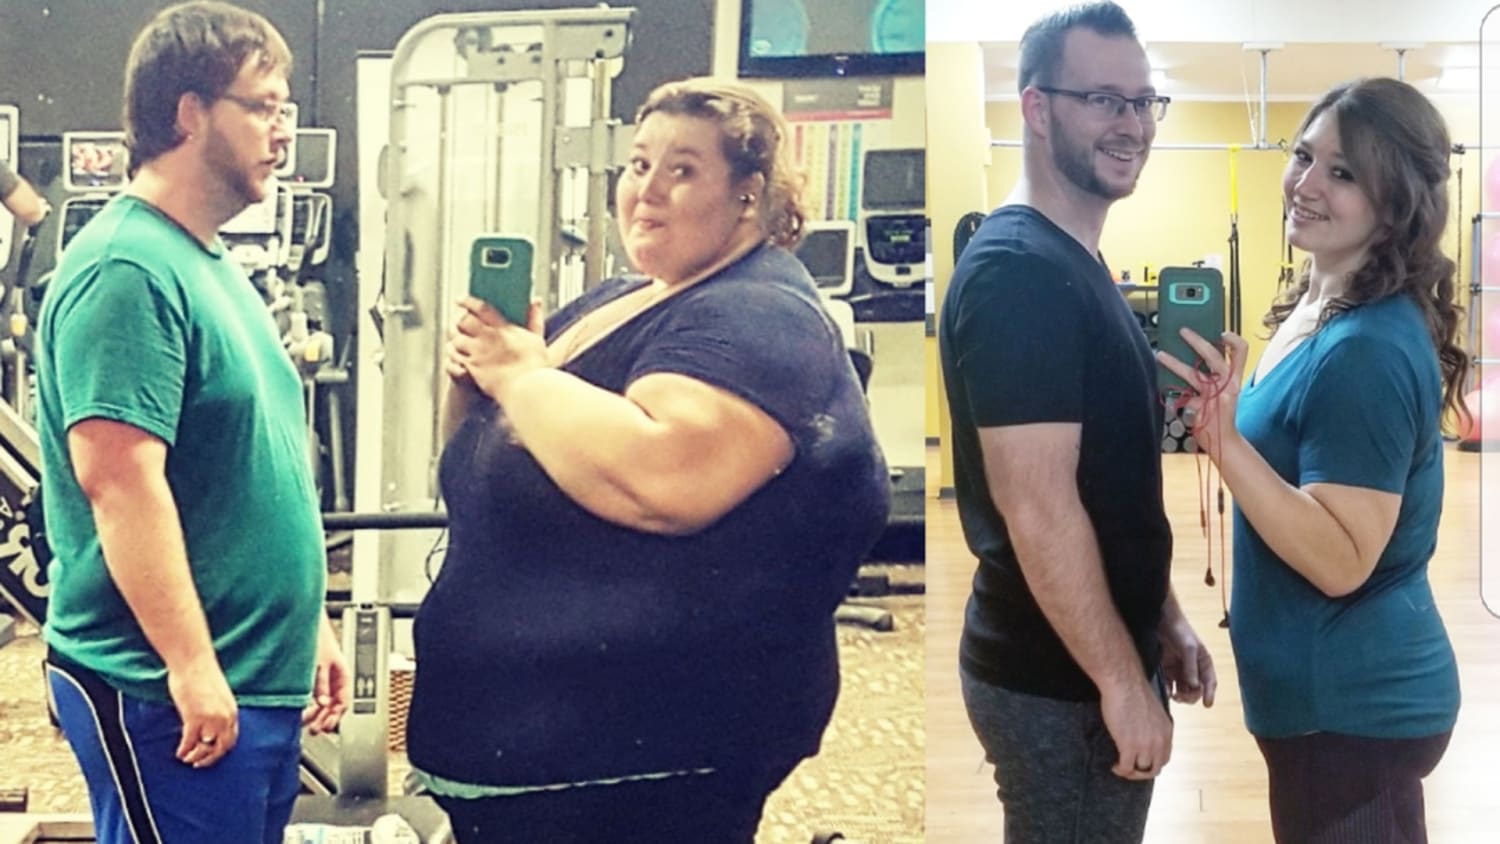 Couple loses 400 pounds in 2 years after New Year's resolution - TODAY.com